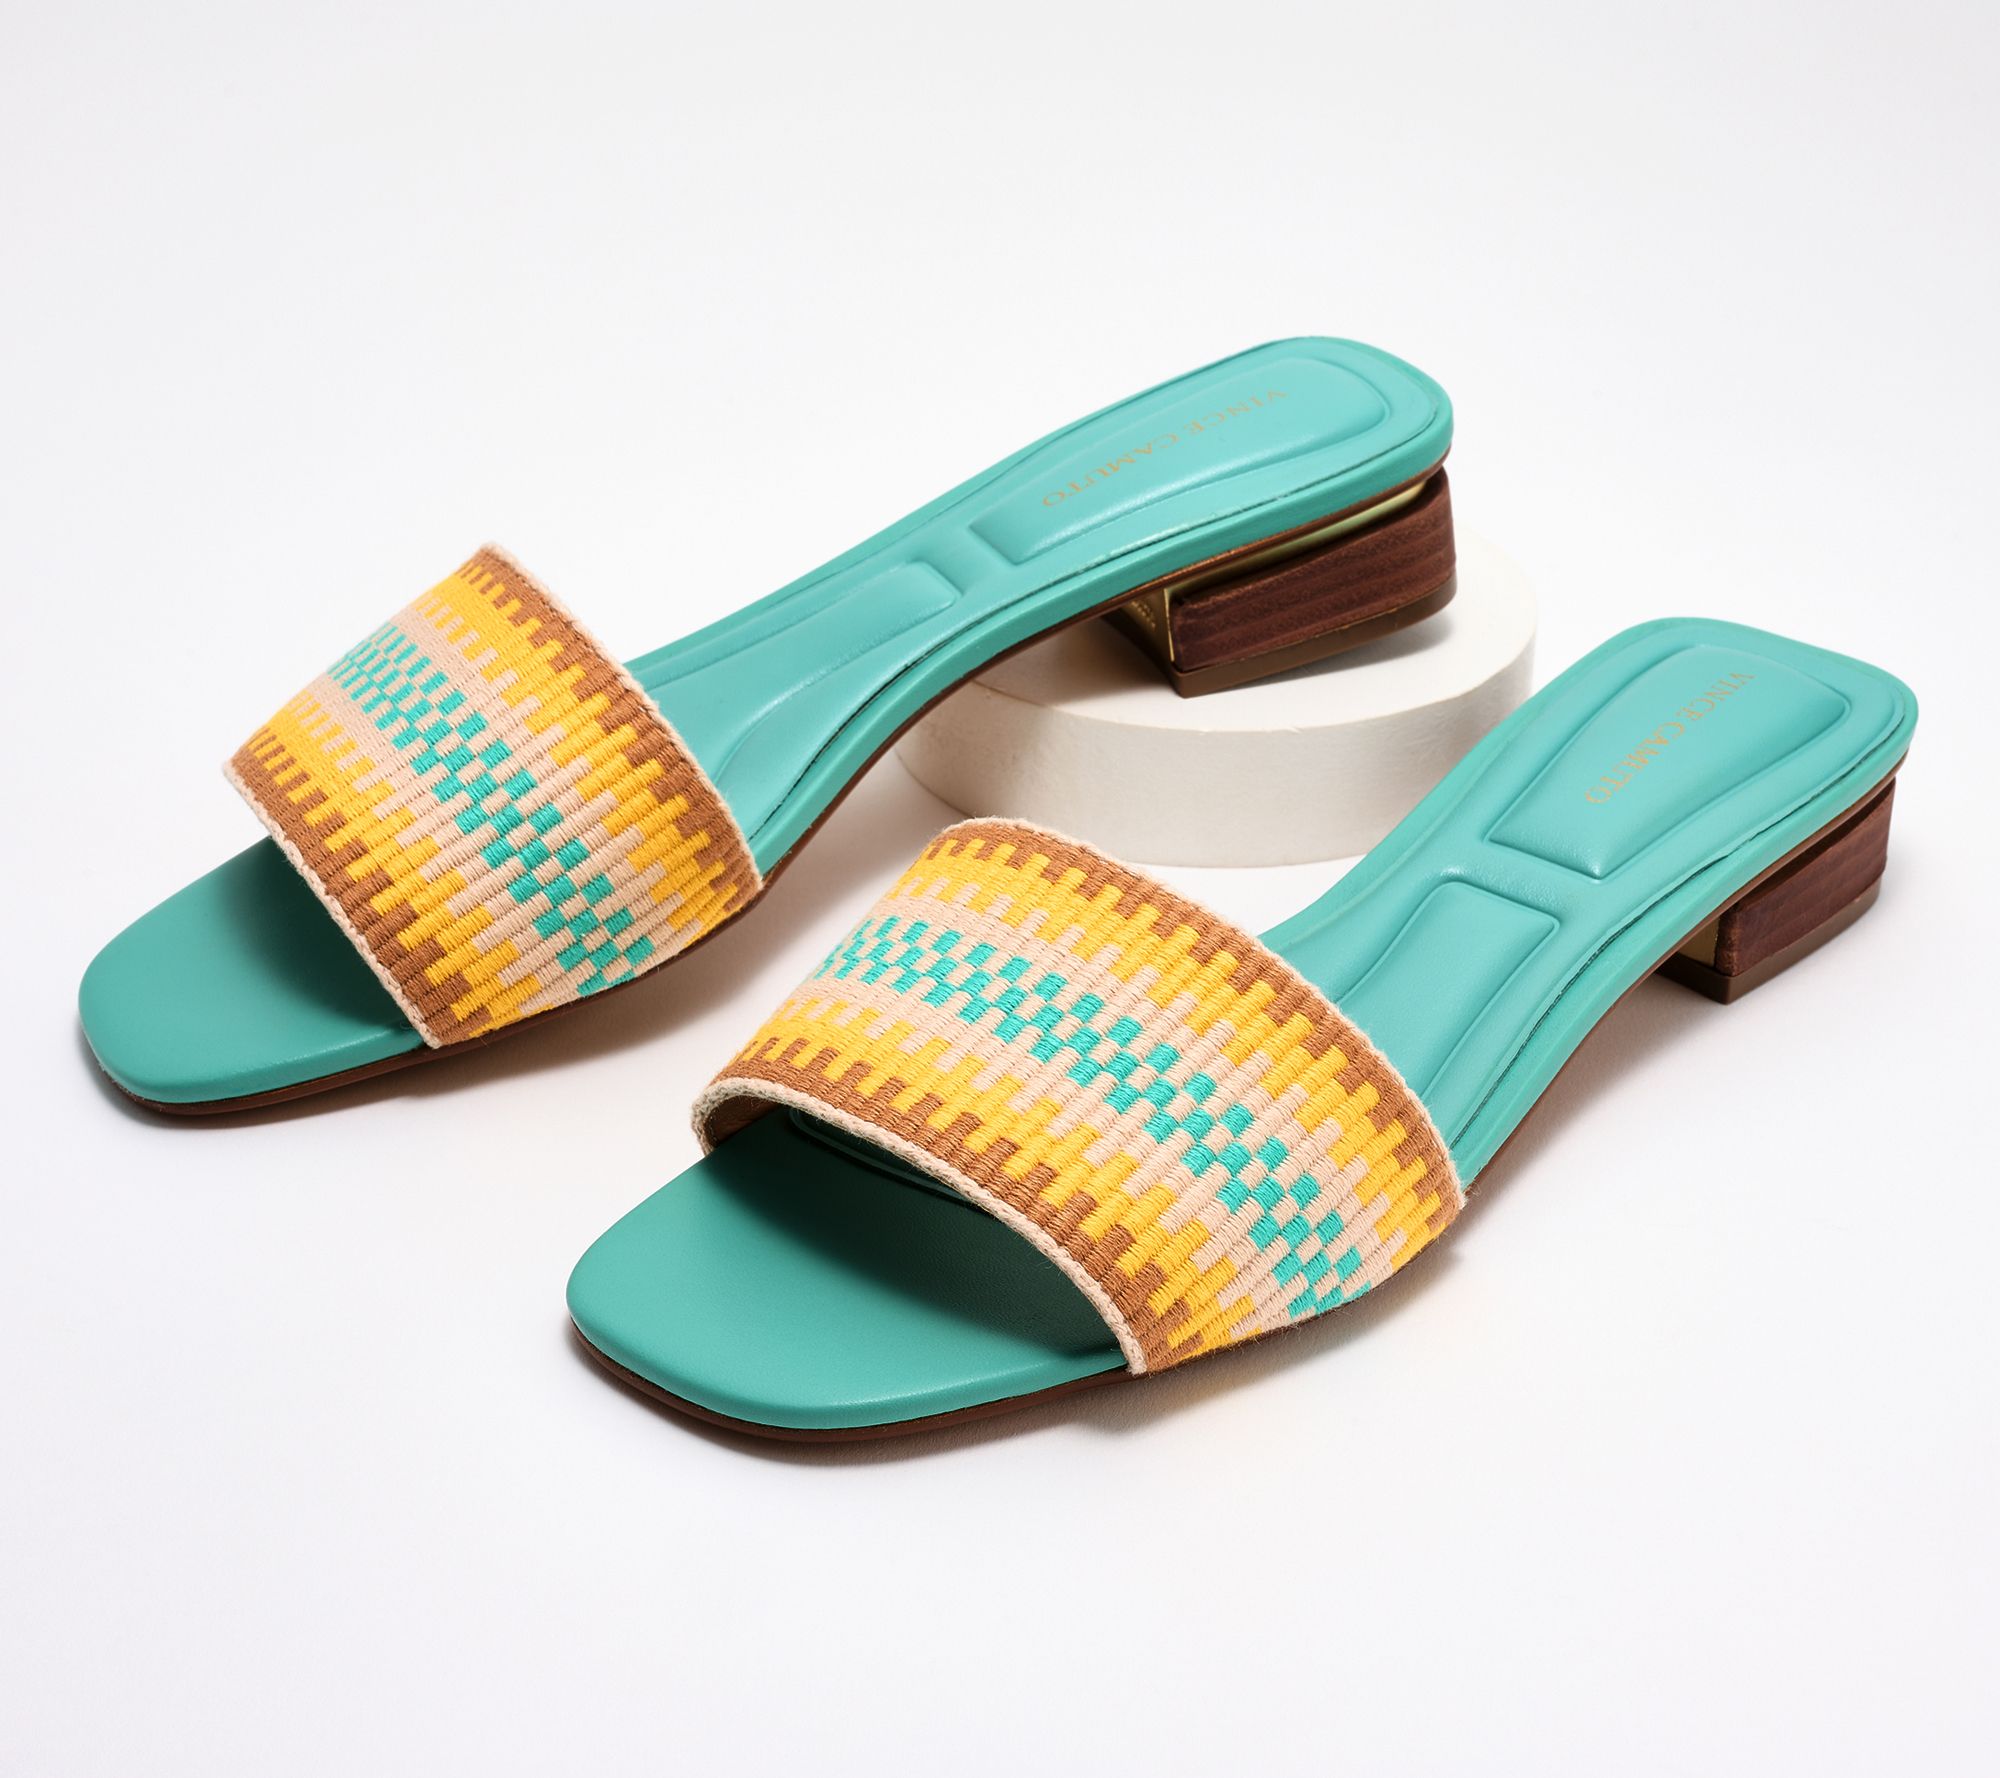 Vince Camuto Demi-Wedge Slide Sandals - Relindie on QVC 